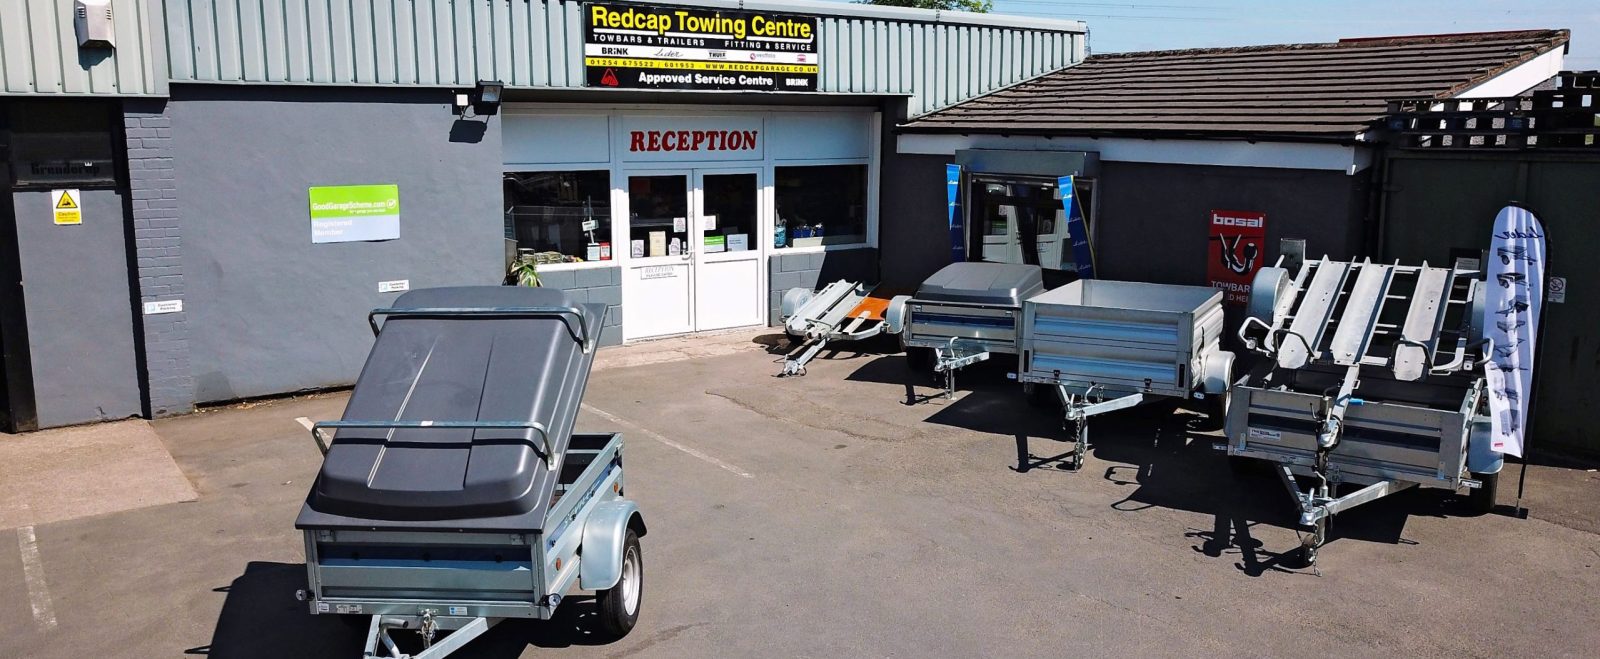 Redcap towing centre front with trailers photo